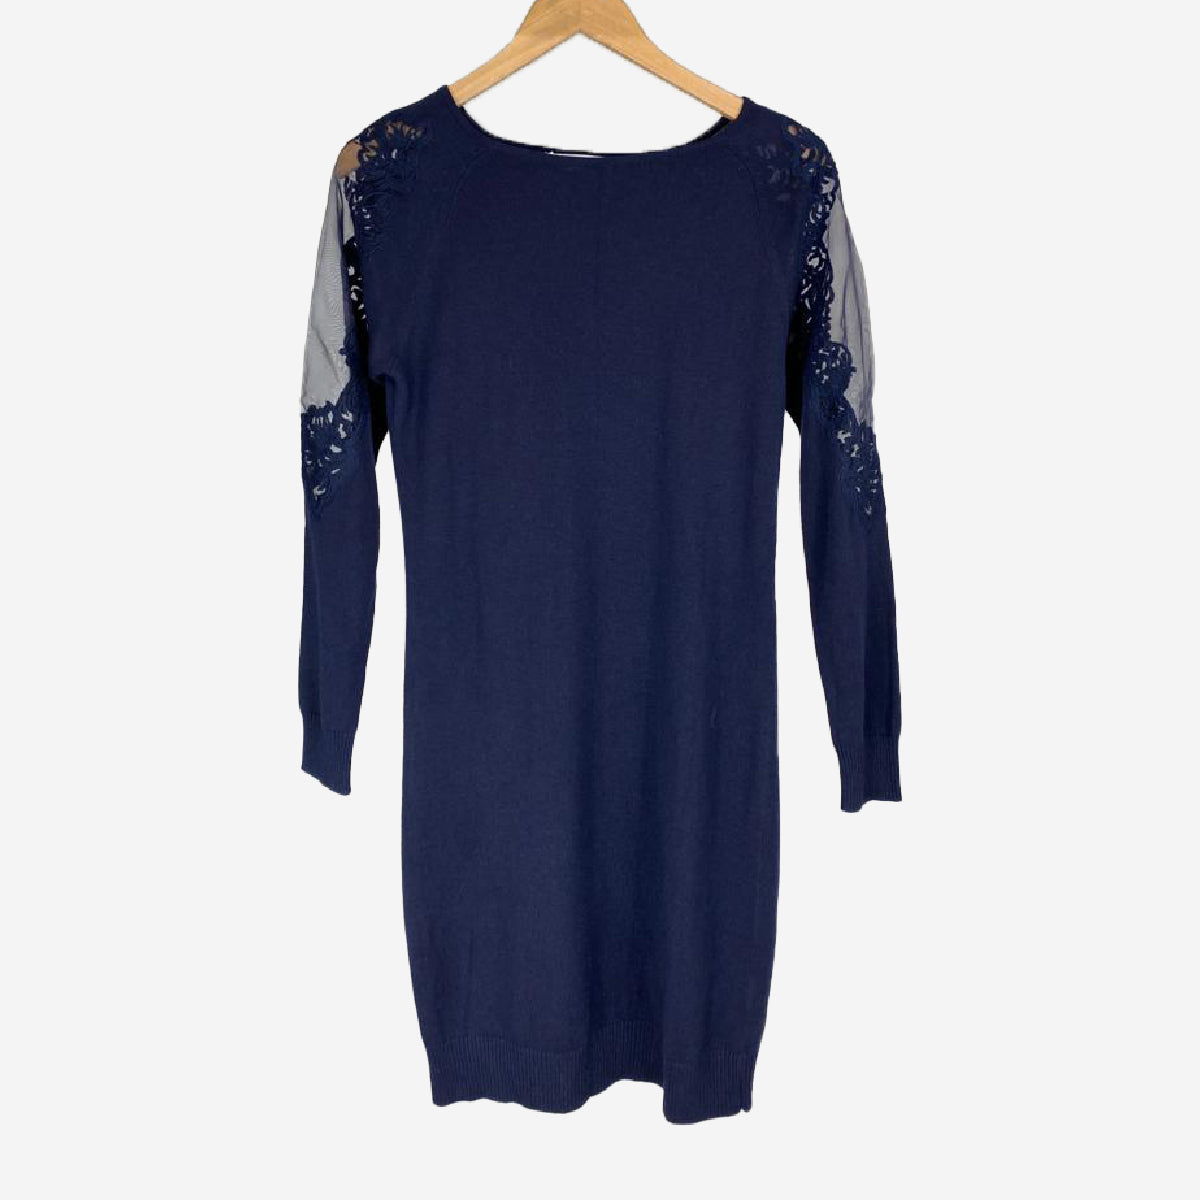 STUNNING NAVY TUNIC WITH SHEER CUT OUT SLEEVE